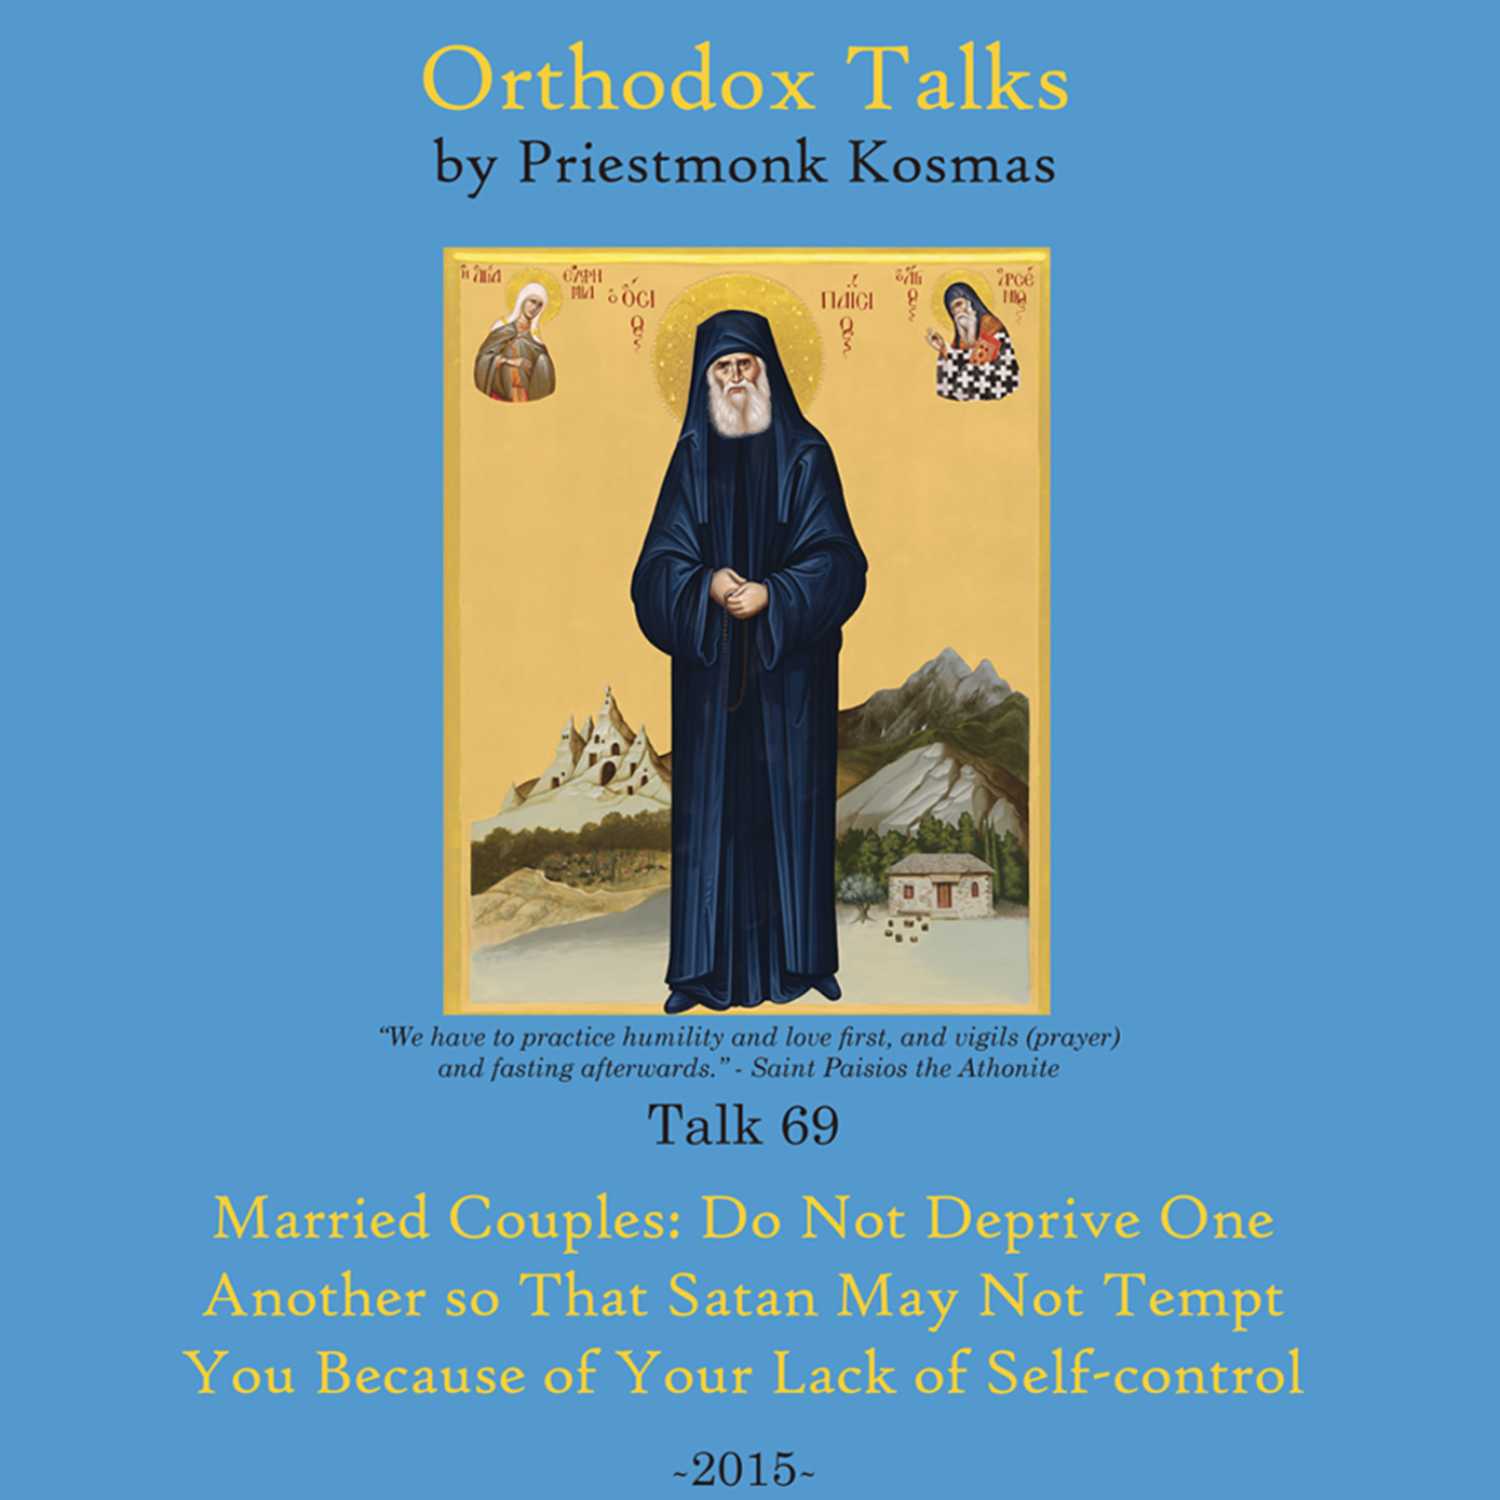 Talk 69: Married Couples: Do Not Deprive One Another so That Satan May Not Tempt You Because of Your Lack of Self-control